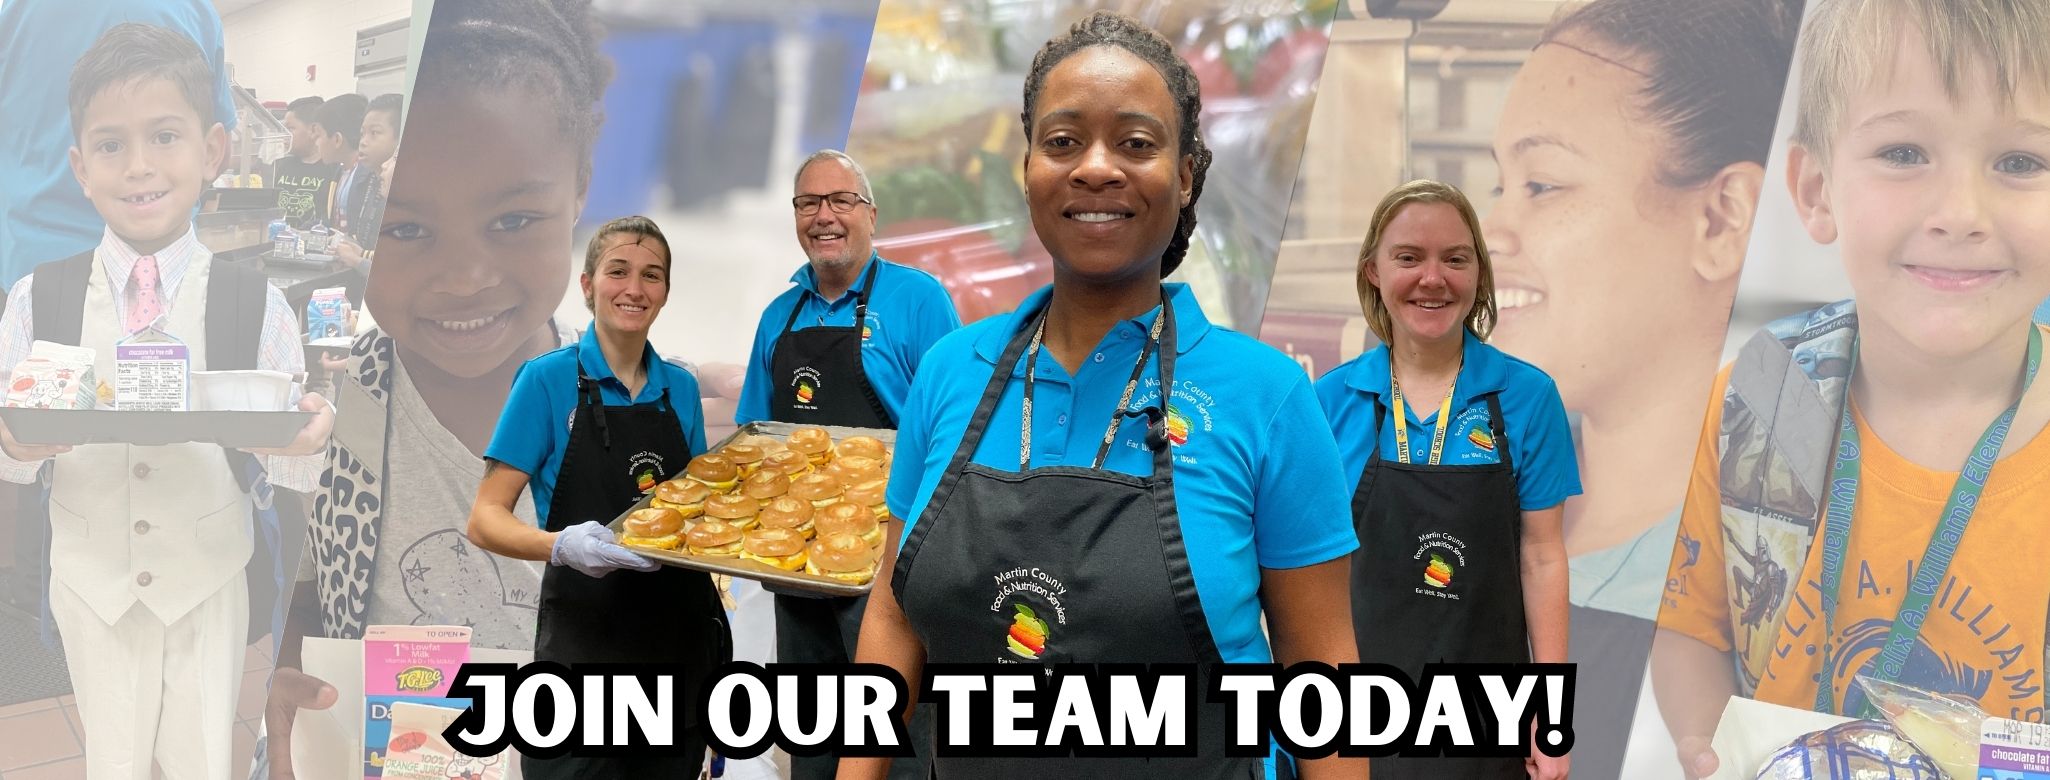 Join our team today!